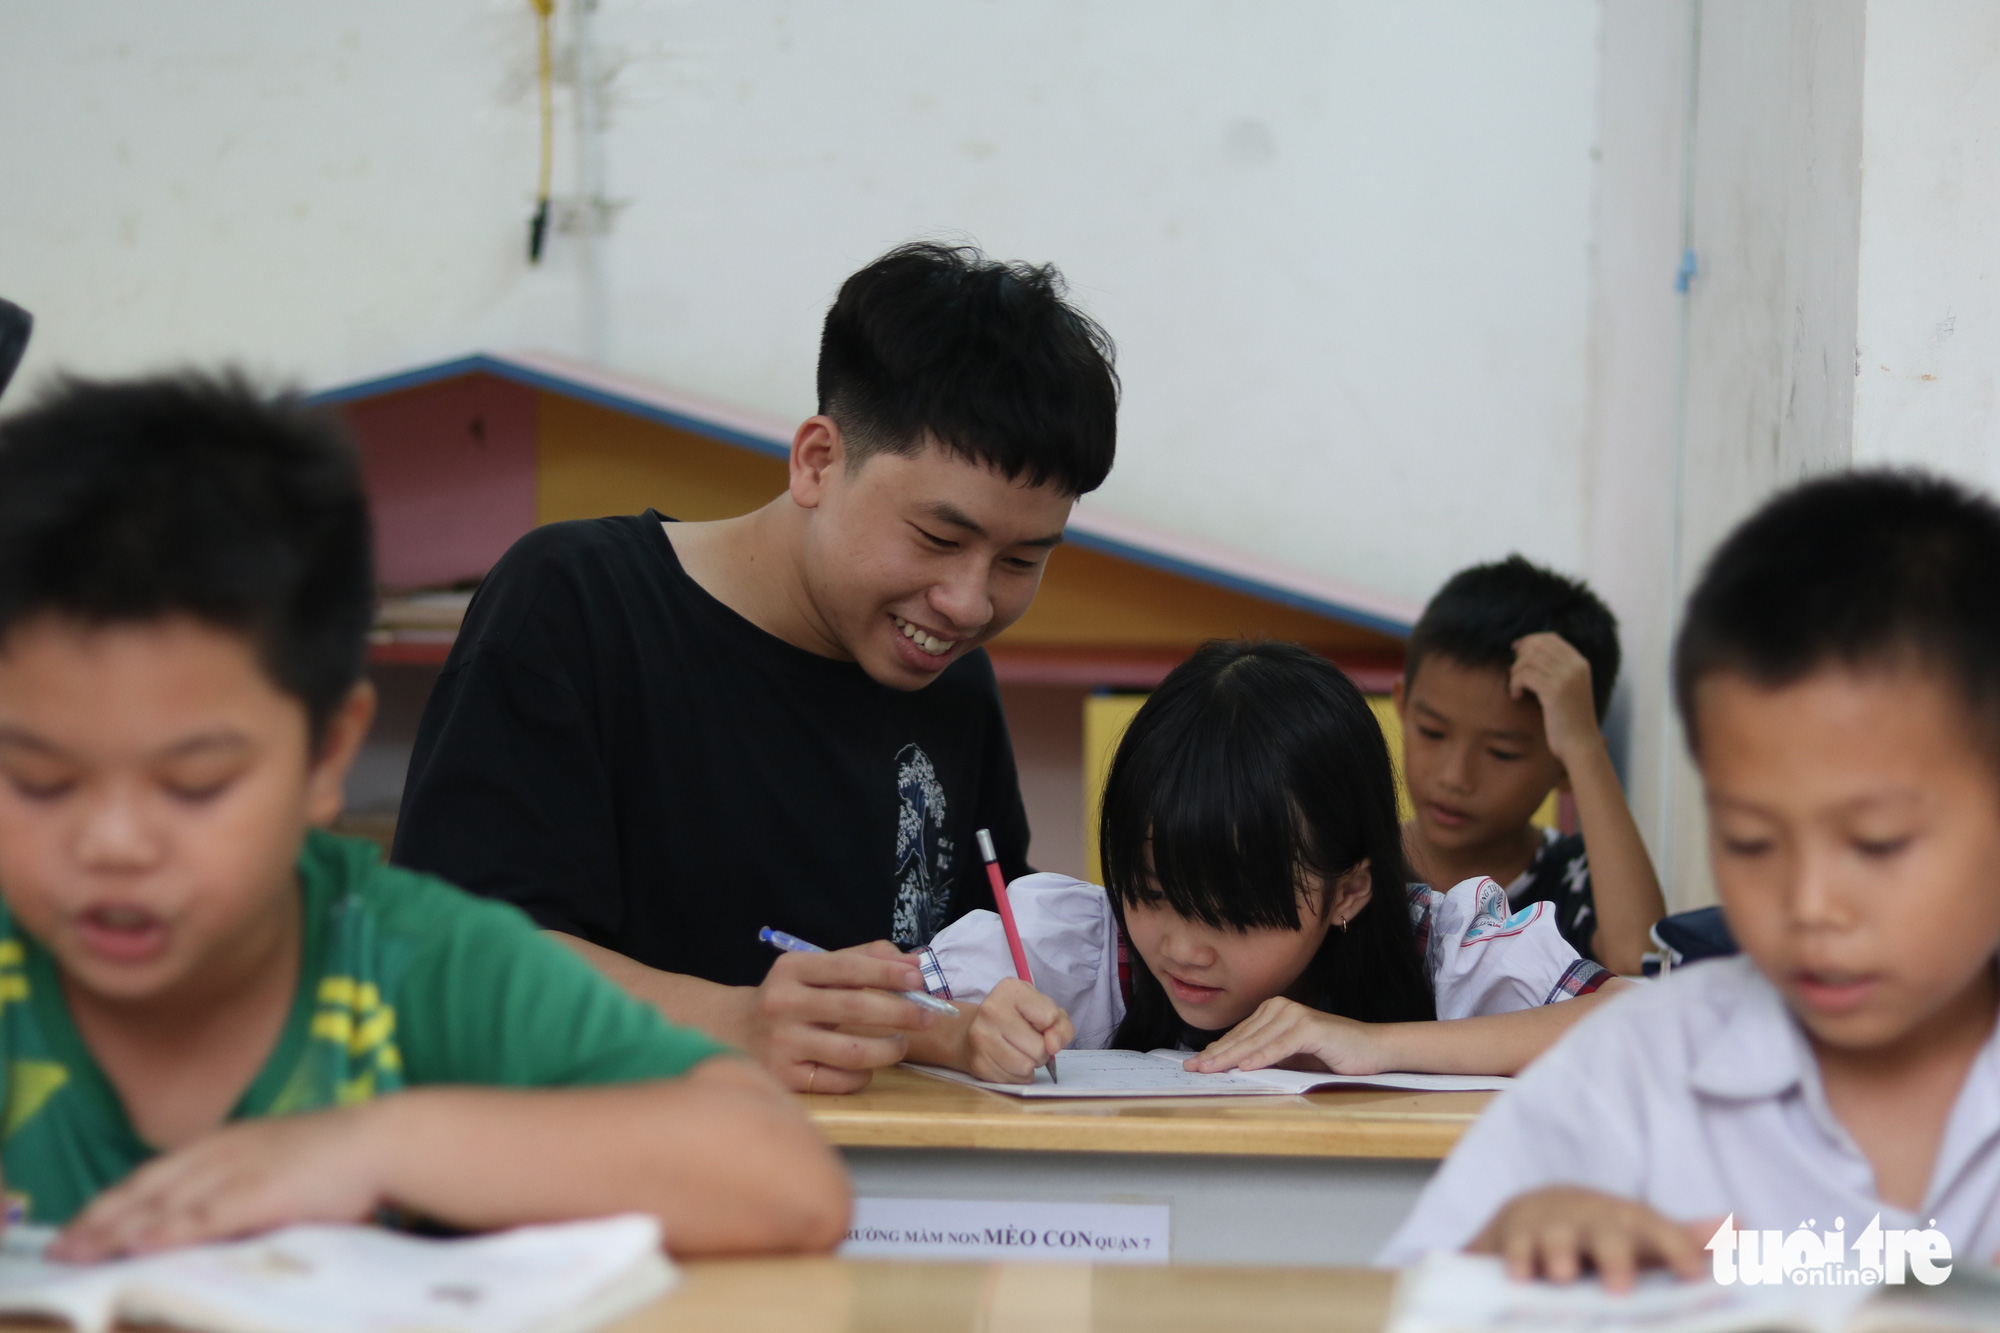 Saigon youth provides free education for underprivileged children